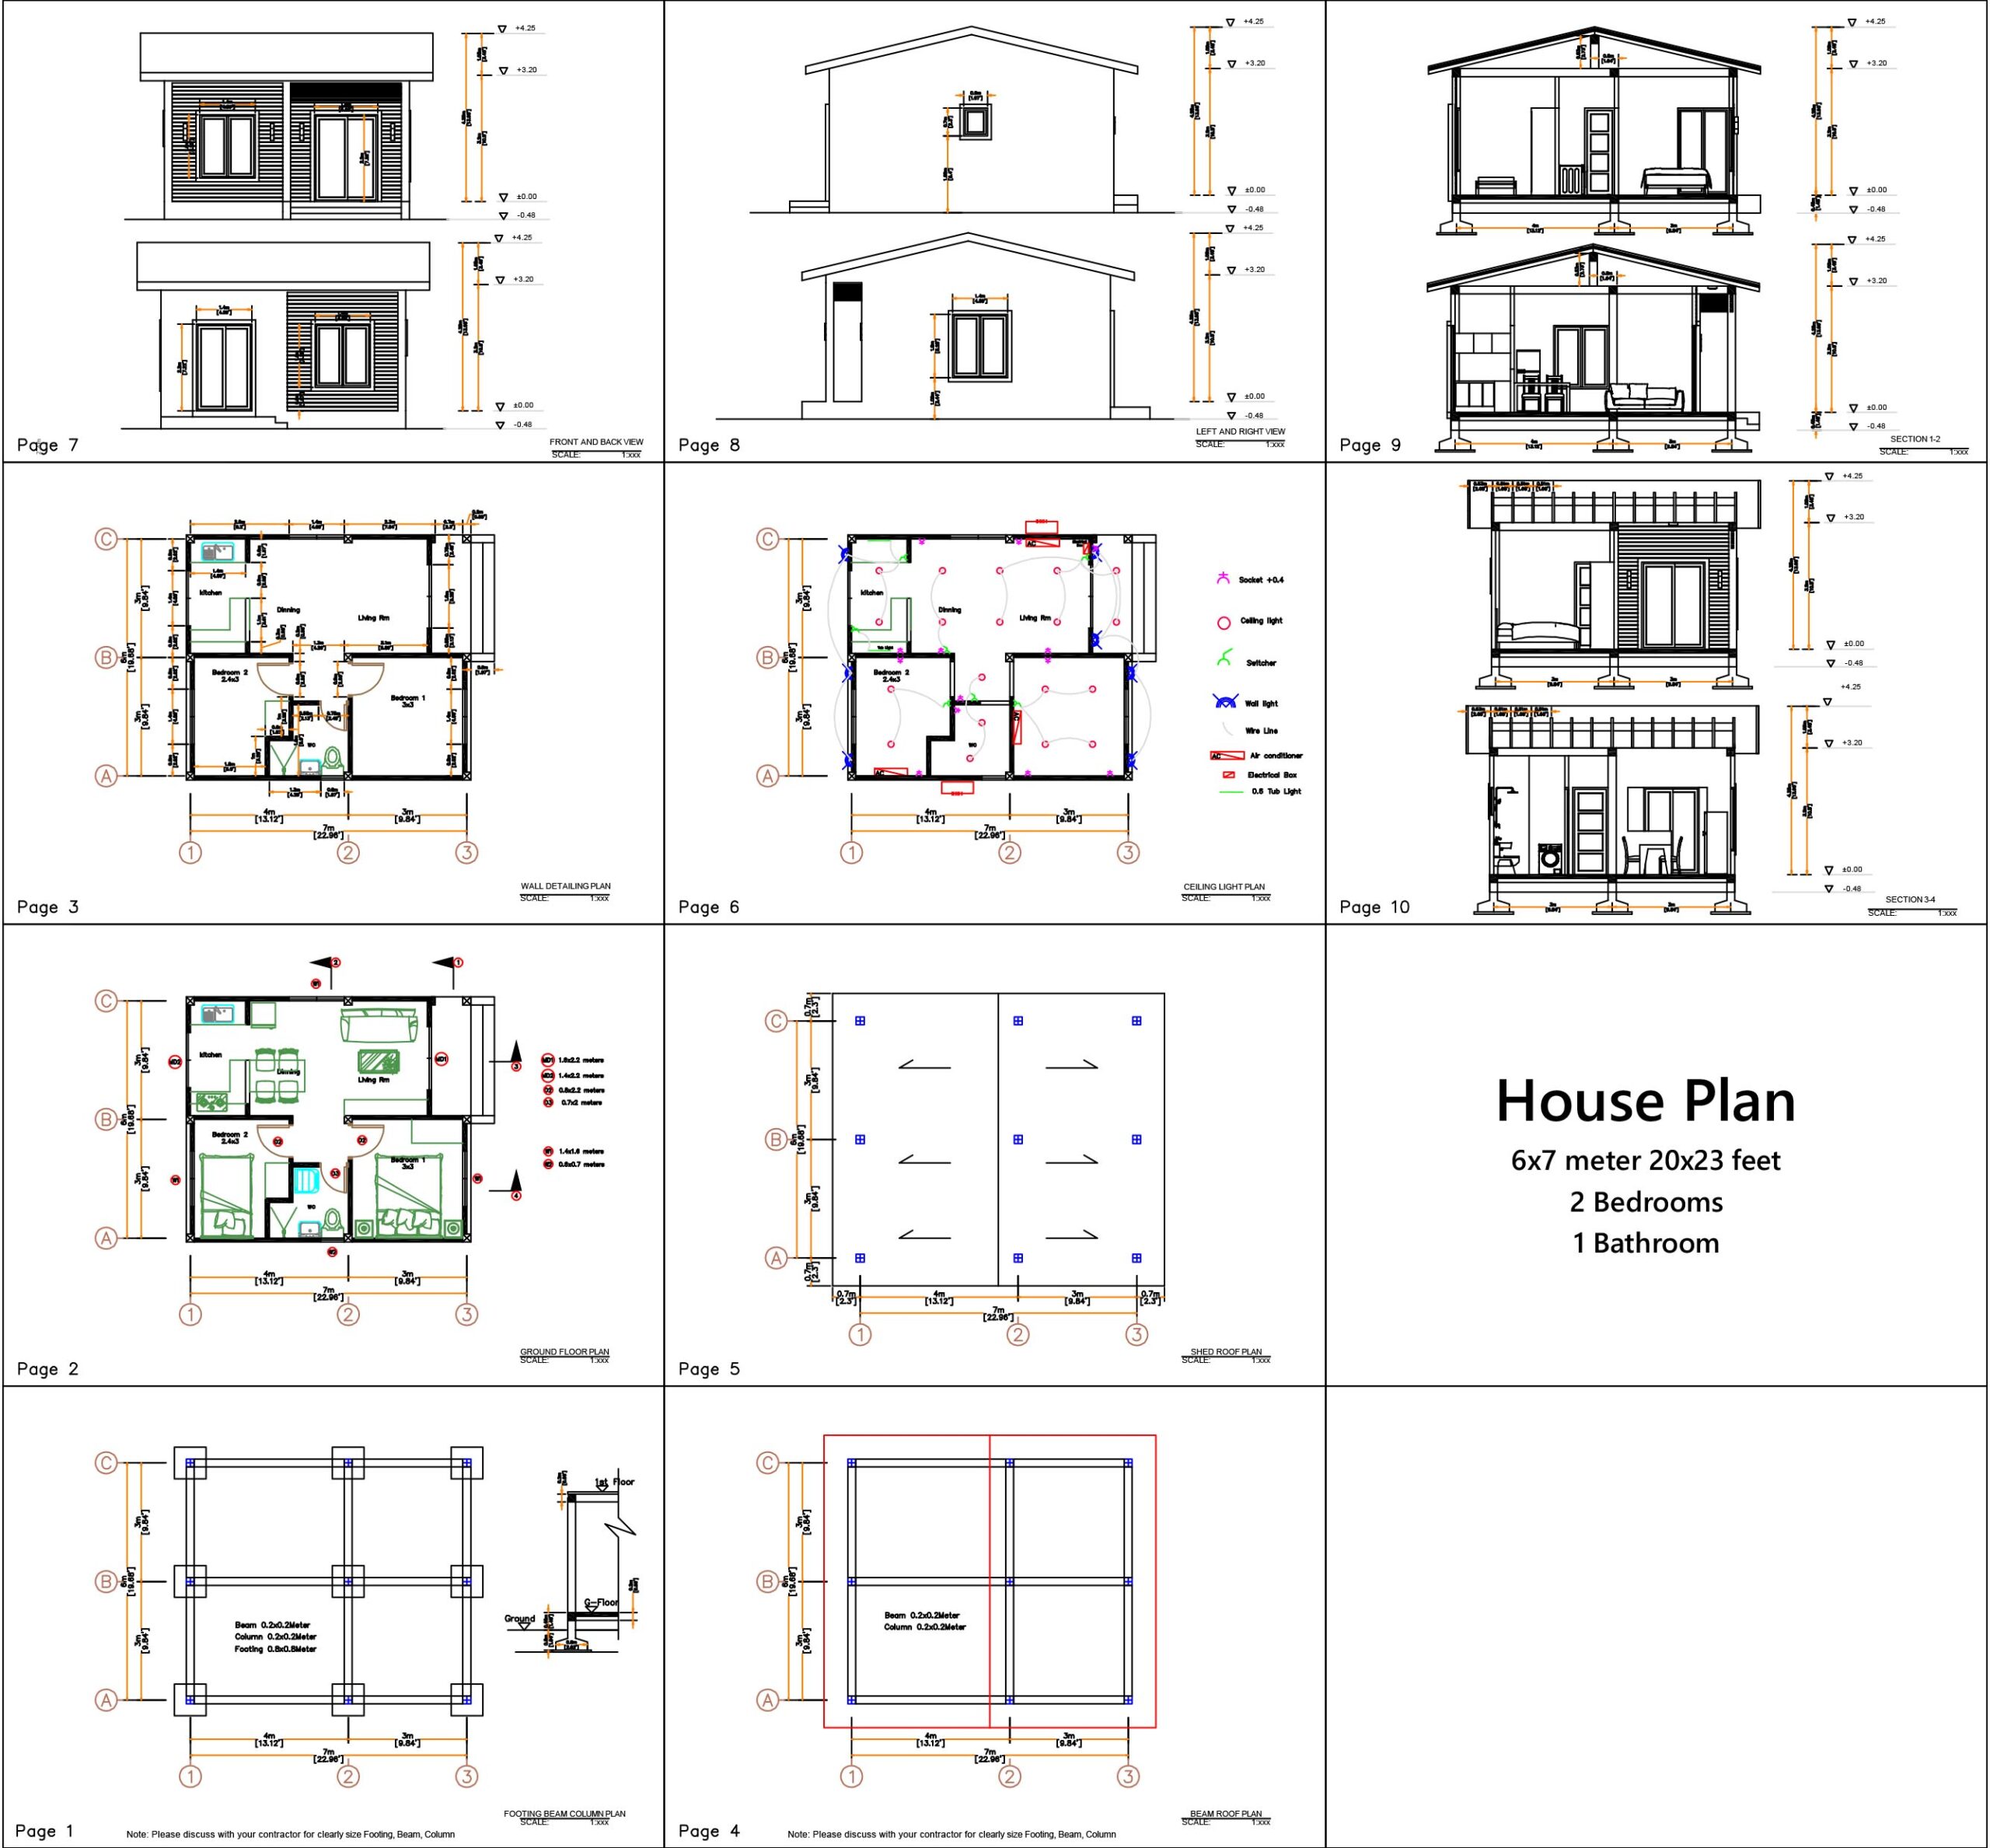 Small House Plans 20x23 Feet 2 Bedrooms 6x7 Meter Pdf Full Plan All layout